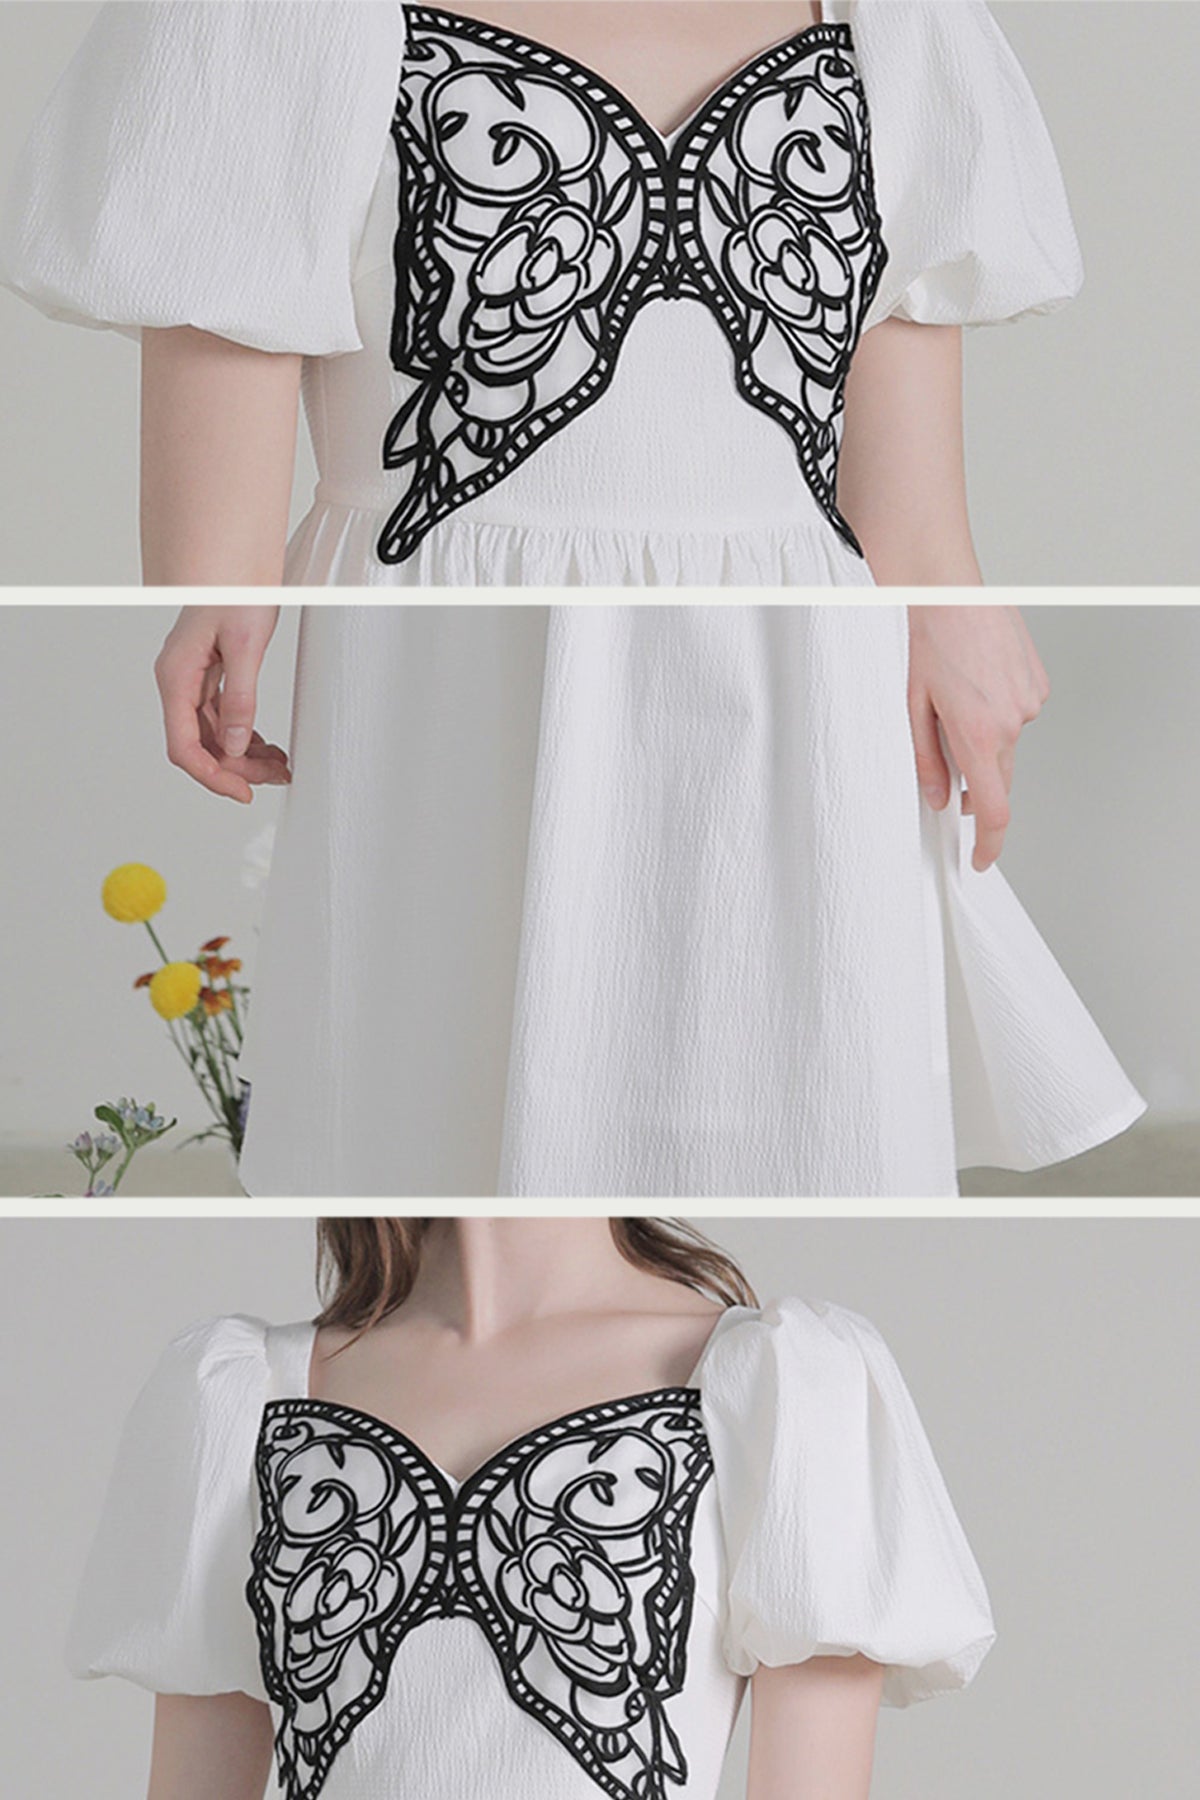 XUNRUO | White Butterfly Embroidered Midi Dress